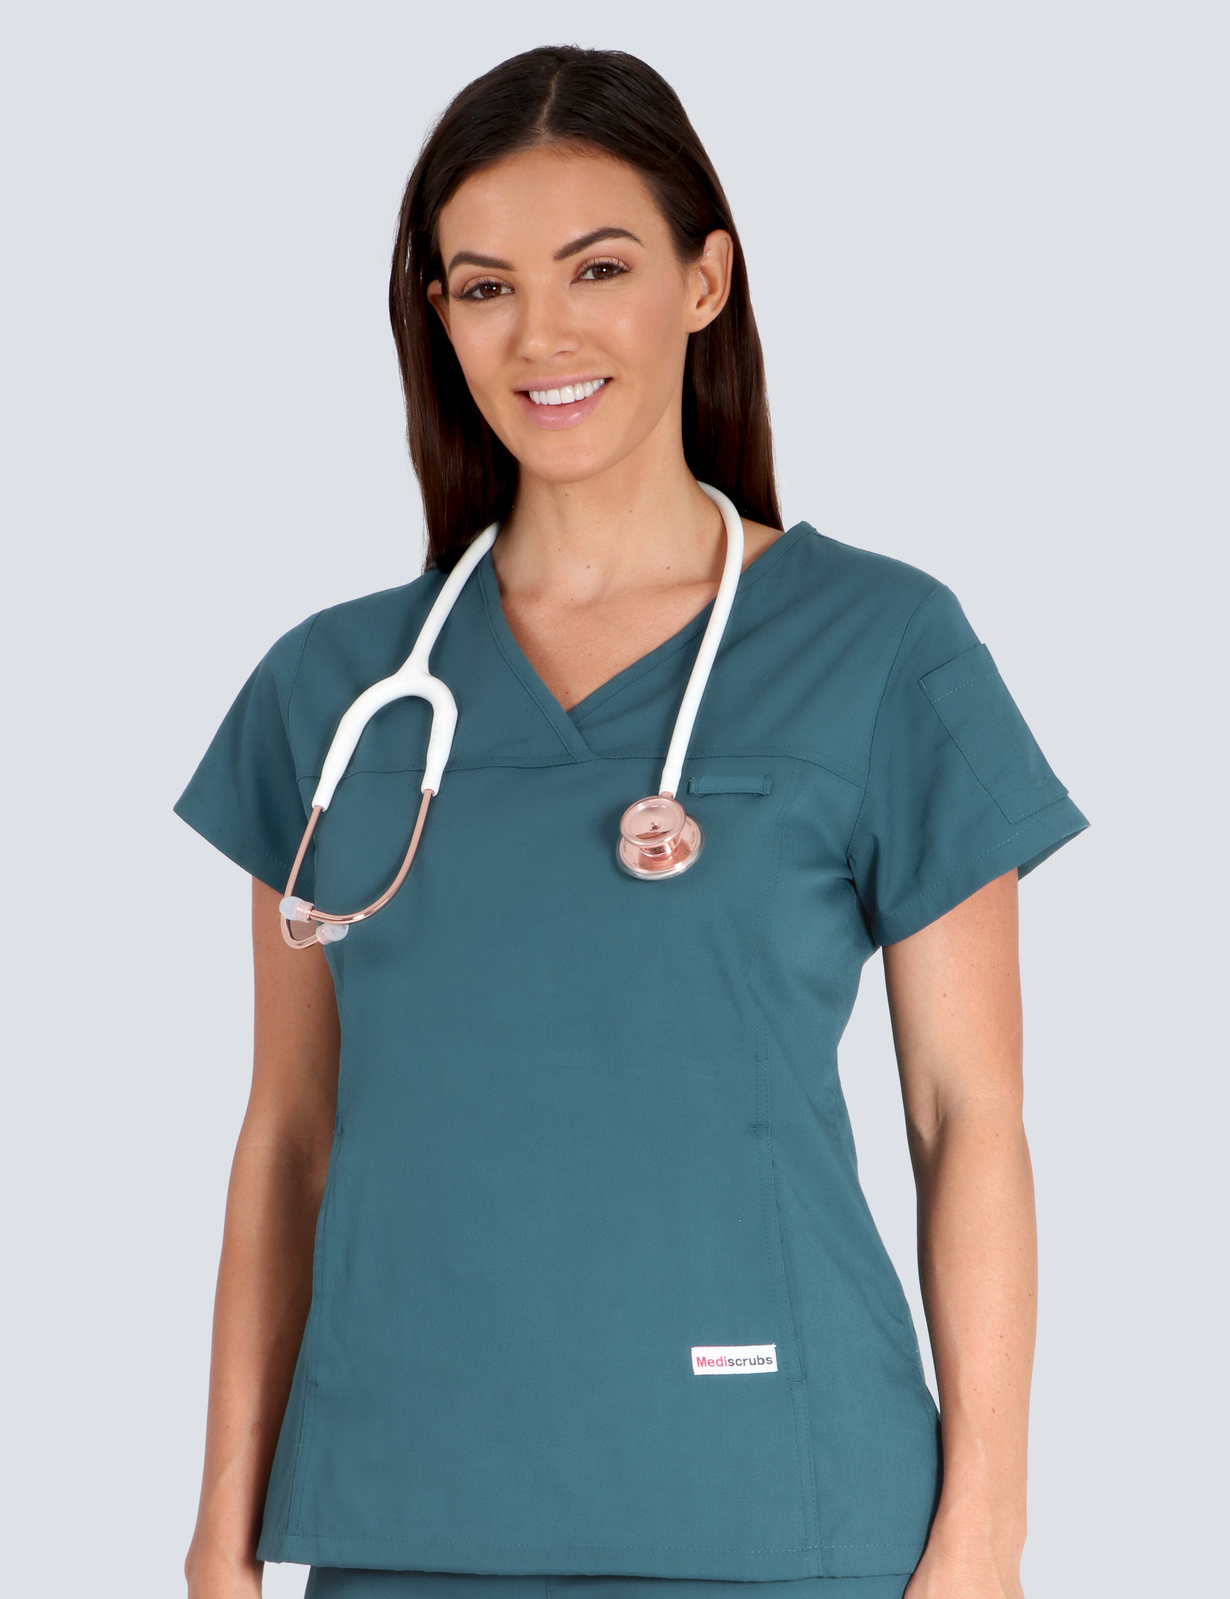 St. Vincent's - Medical Imaging Nuclear Medicine (Women's Fit Solid Scrub Top in Caribbean incl Logos)